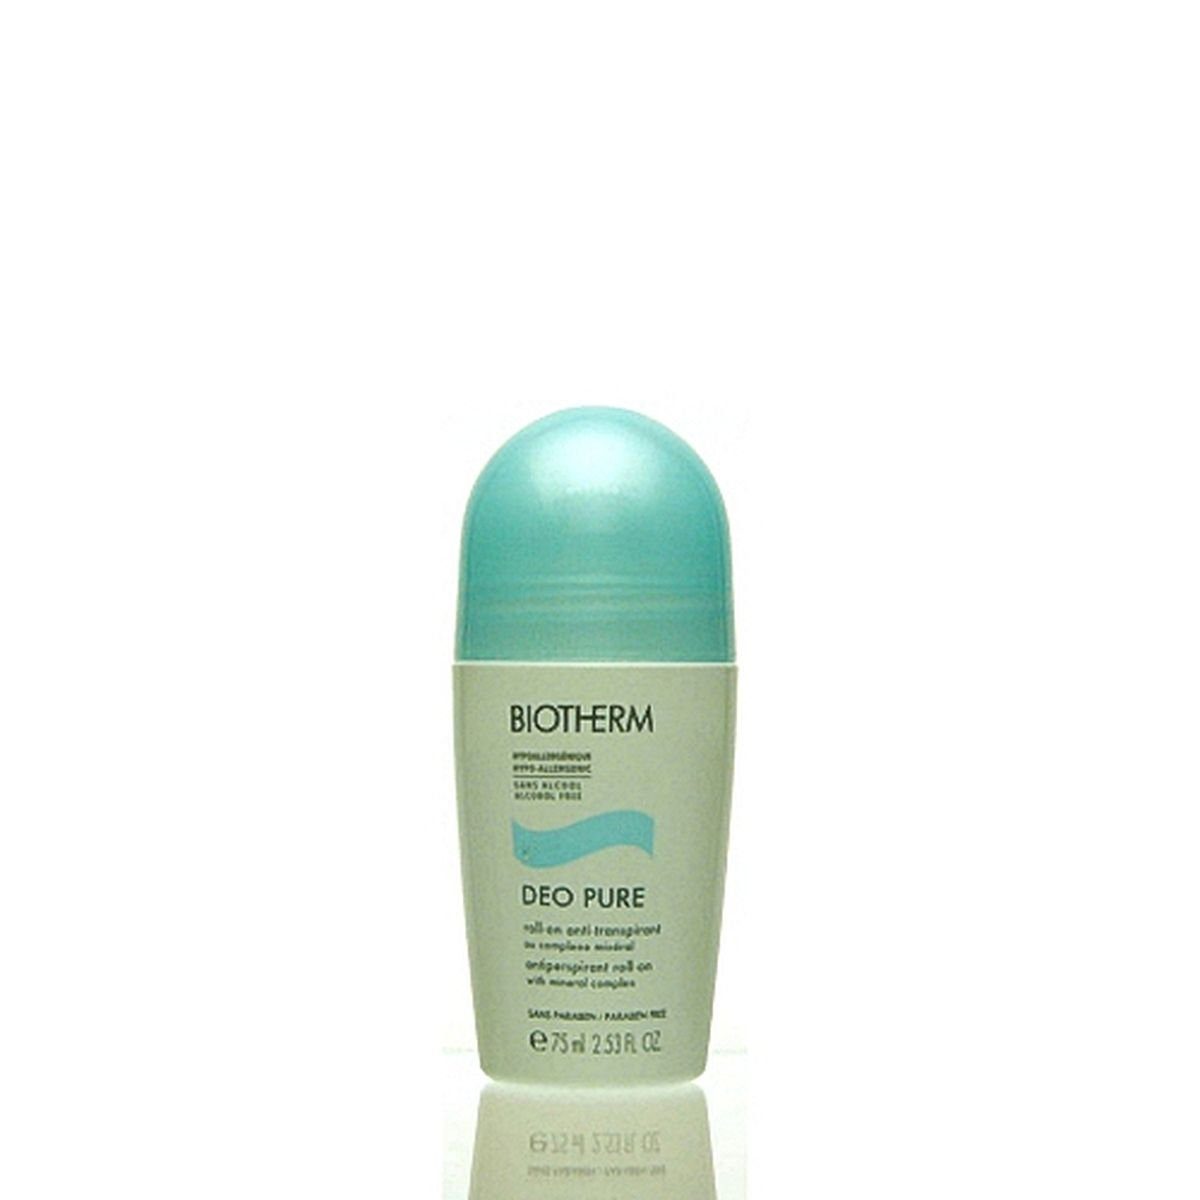 75 BIOTHERM ml Deo Roll-on Biotherm Pure Körperspray